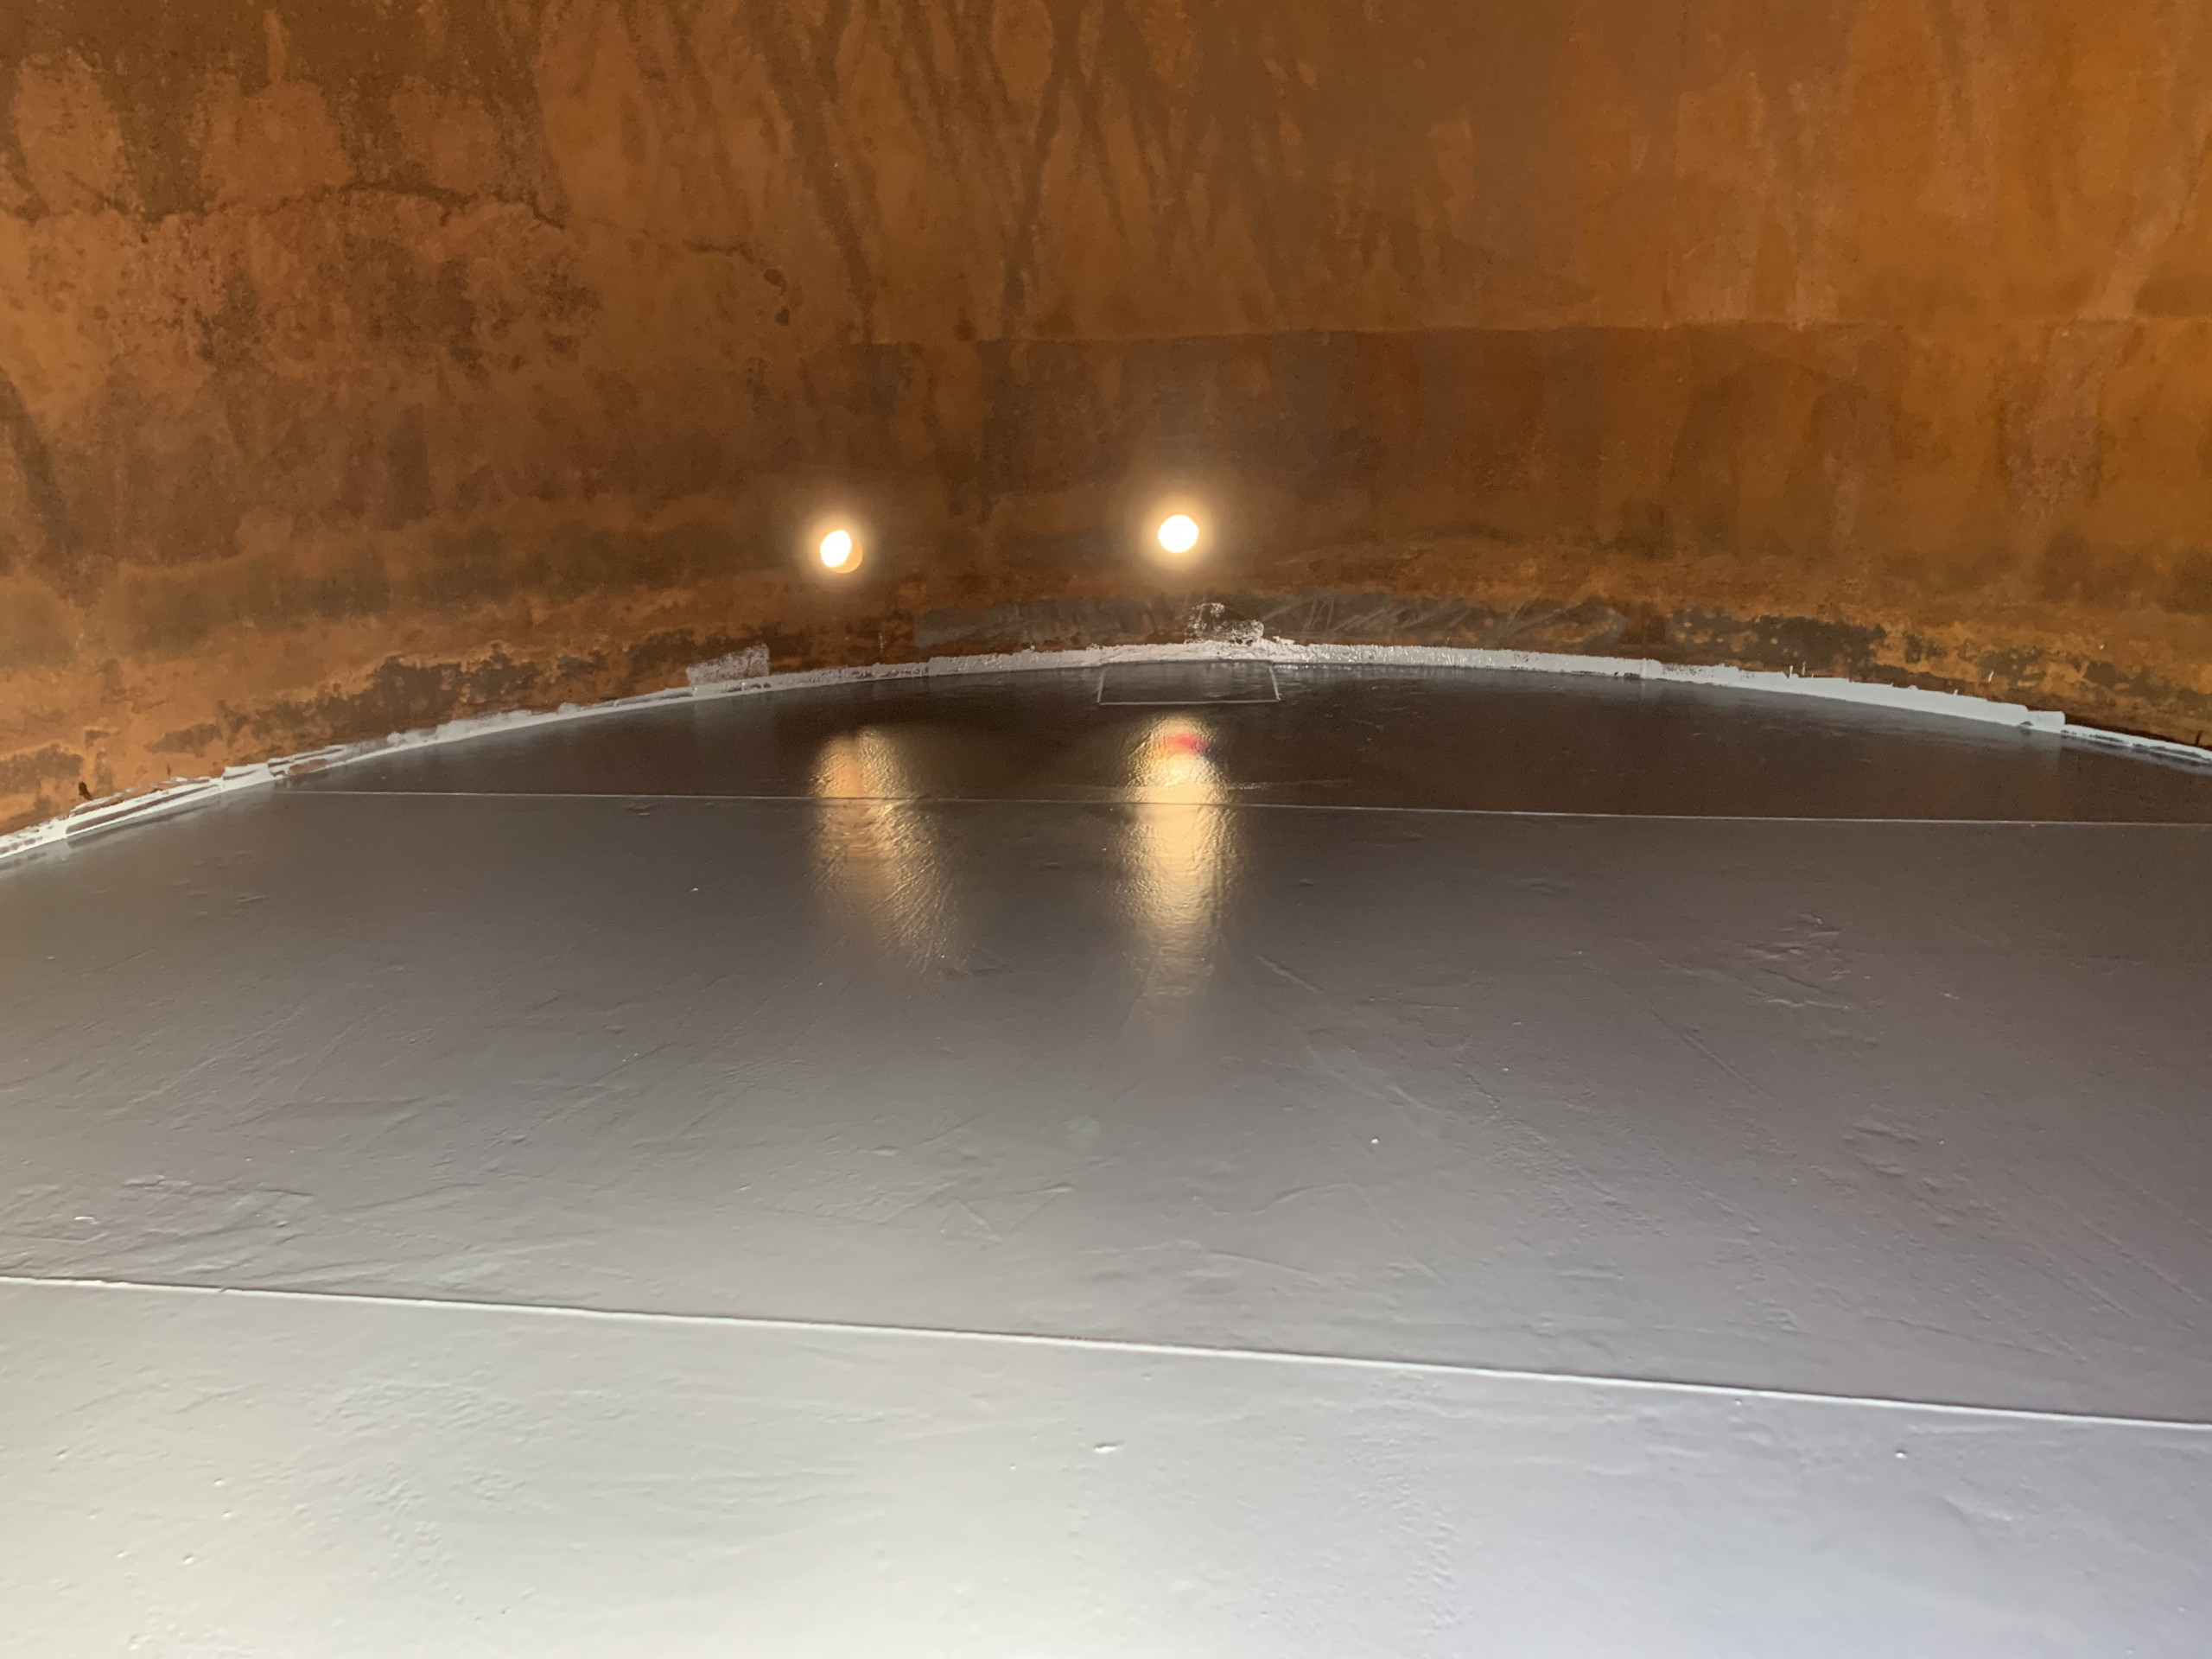 View of the inside of tank with epoxy coating on the floor of the tank.